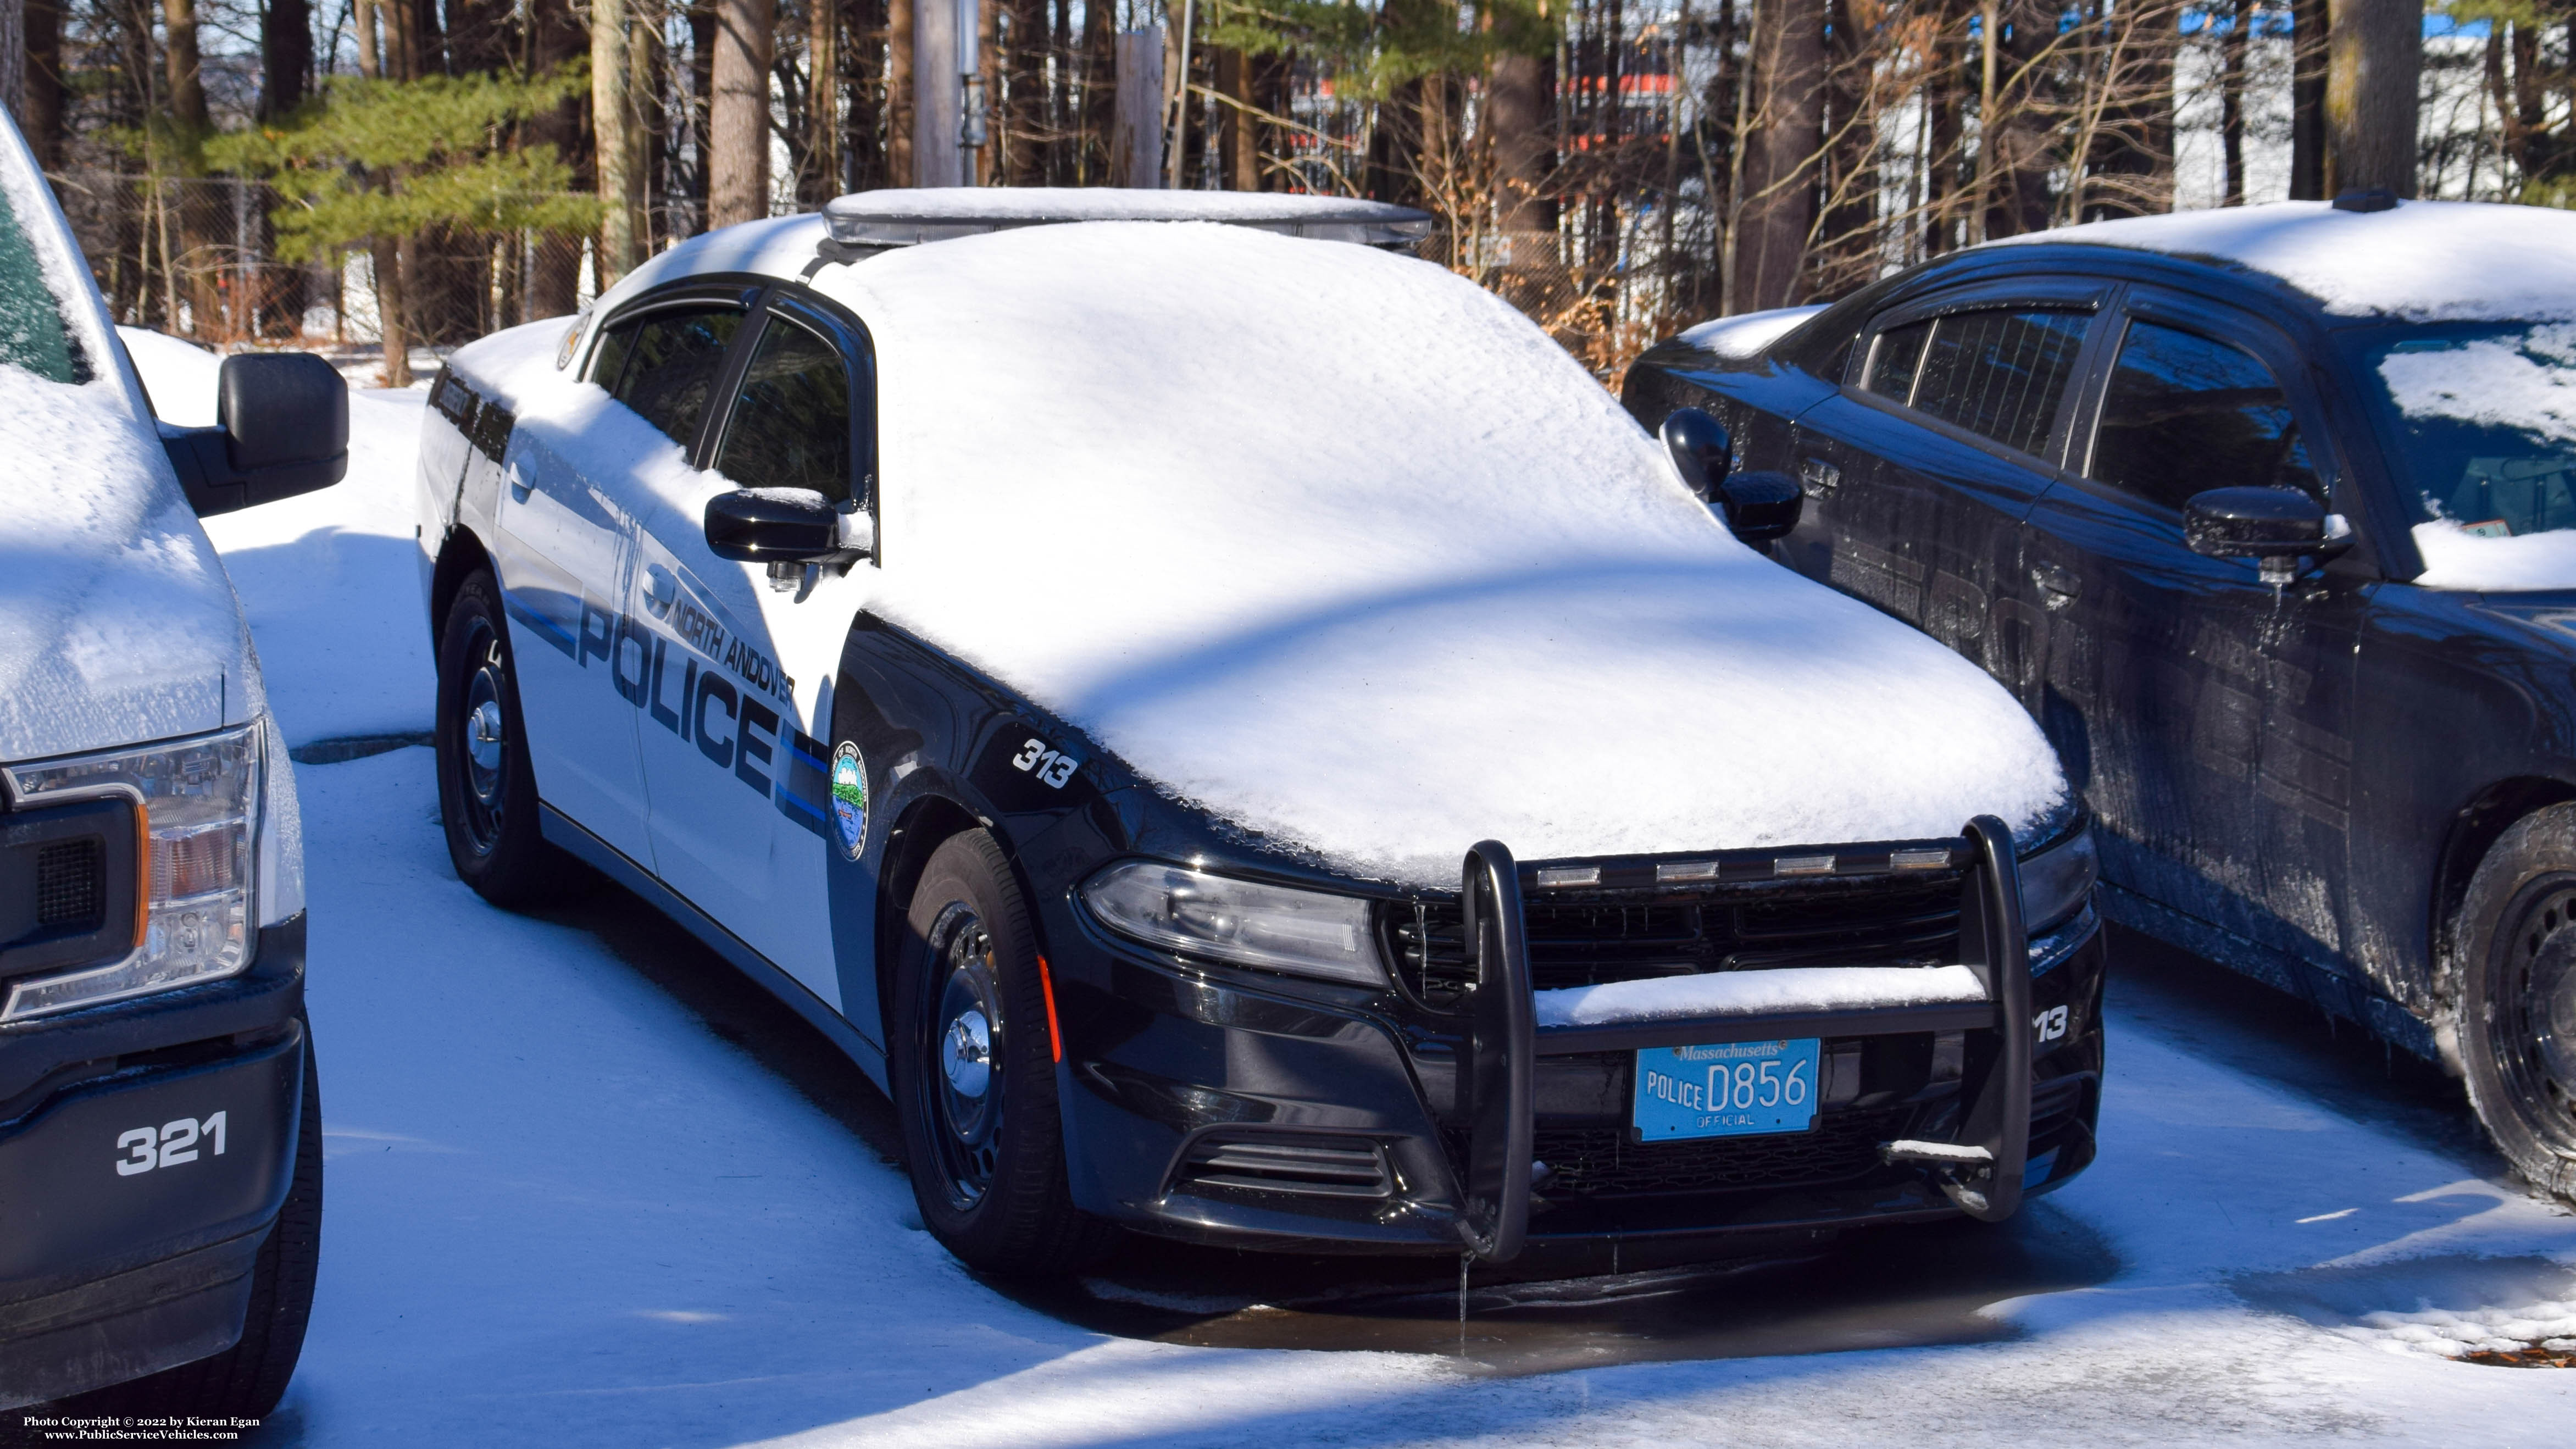 A photo  of North Andover Police
            Cruiser 313, a 2018 Dodge Charger             taken by Kieran Egan